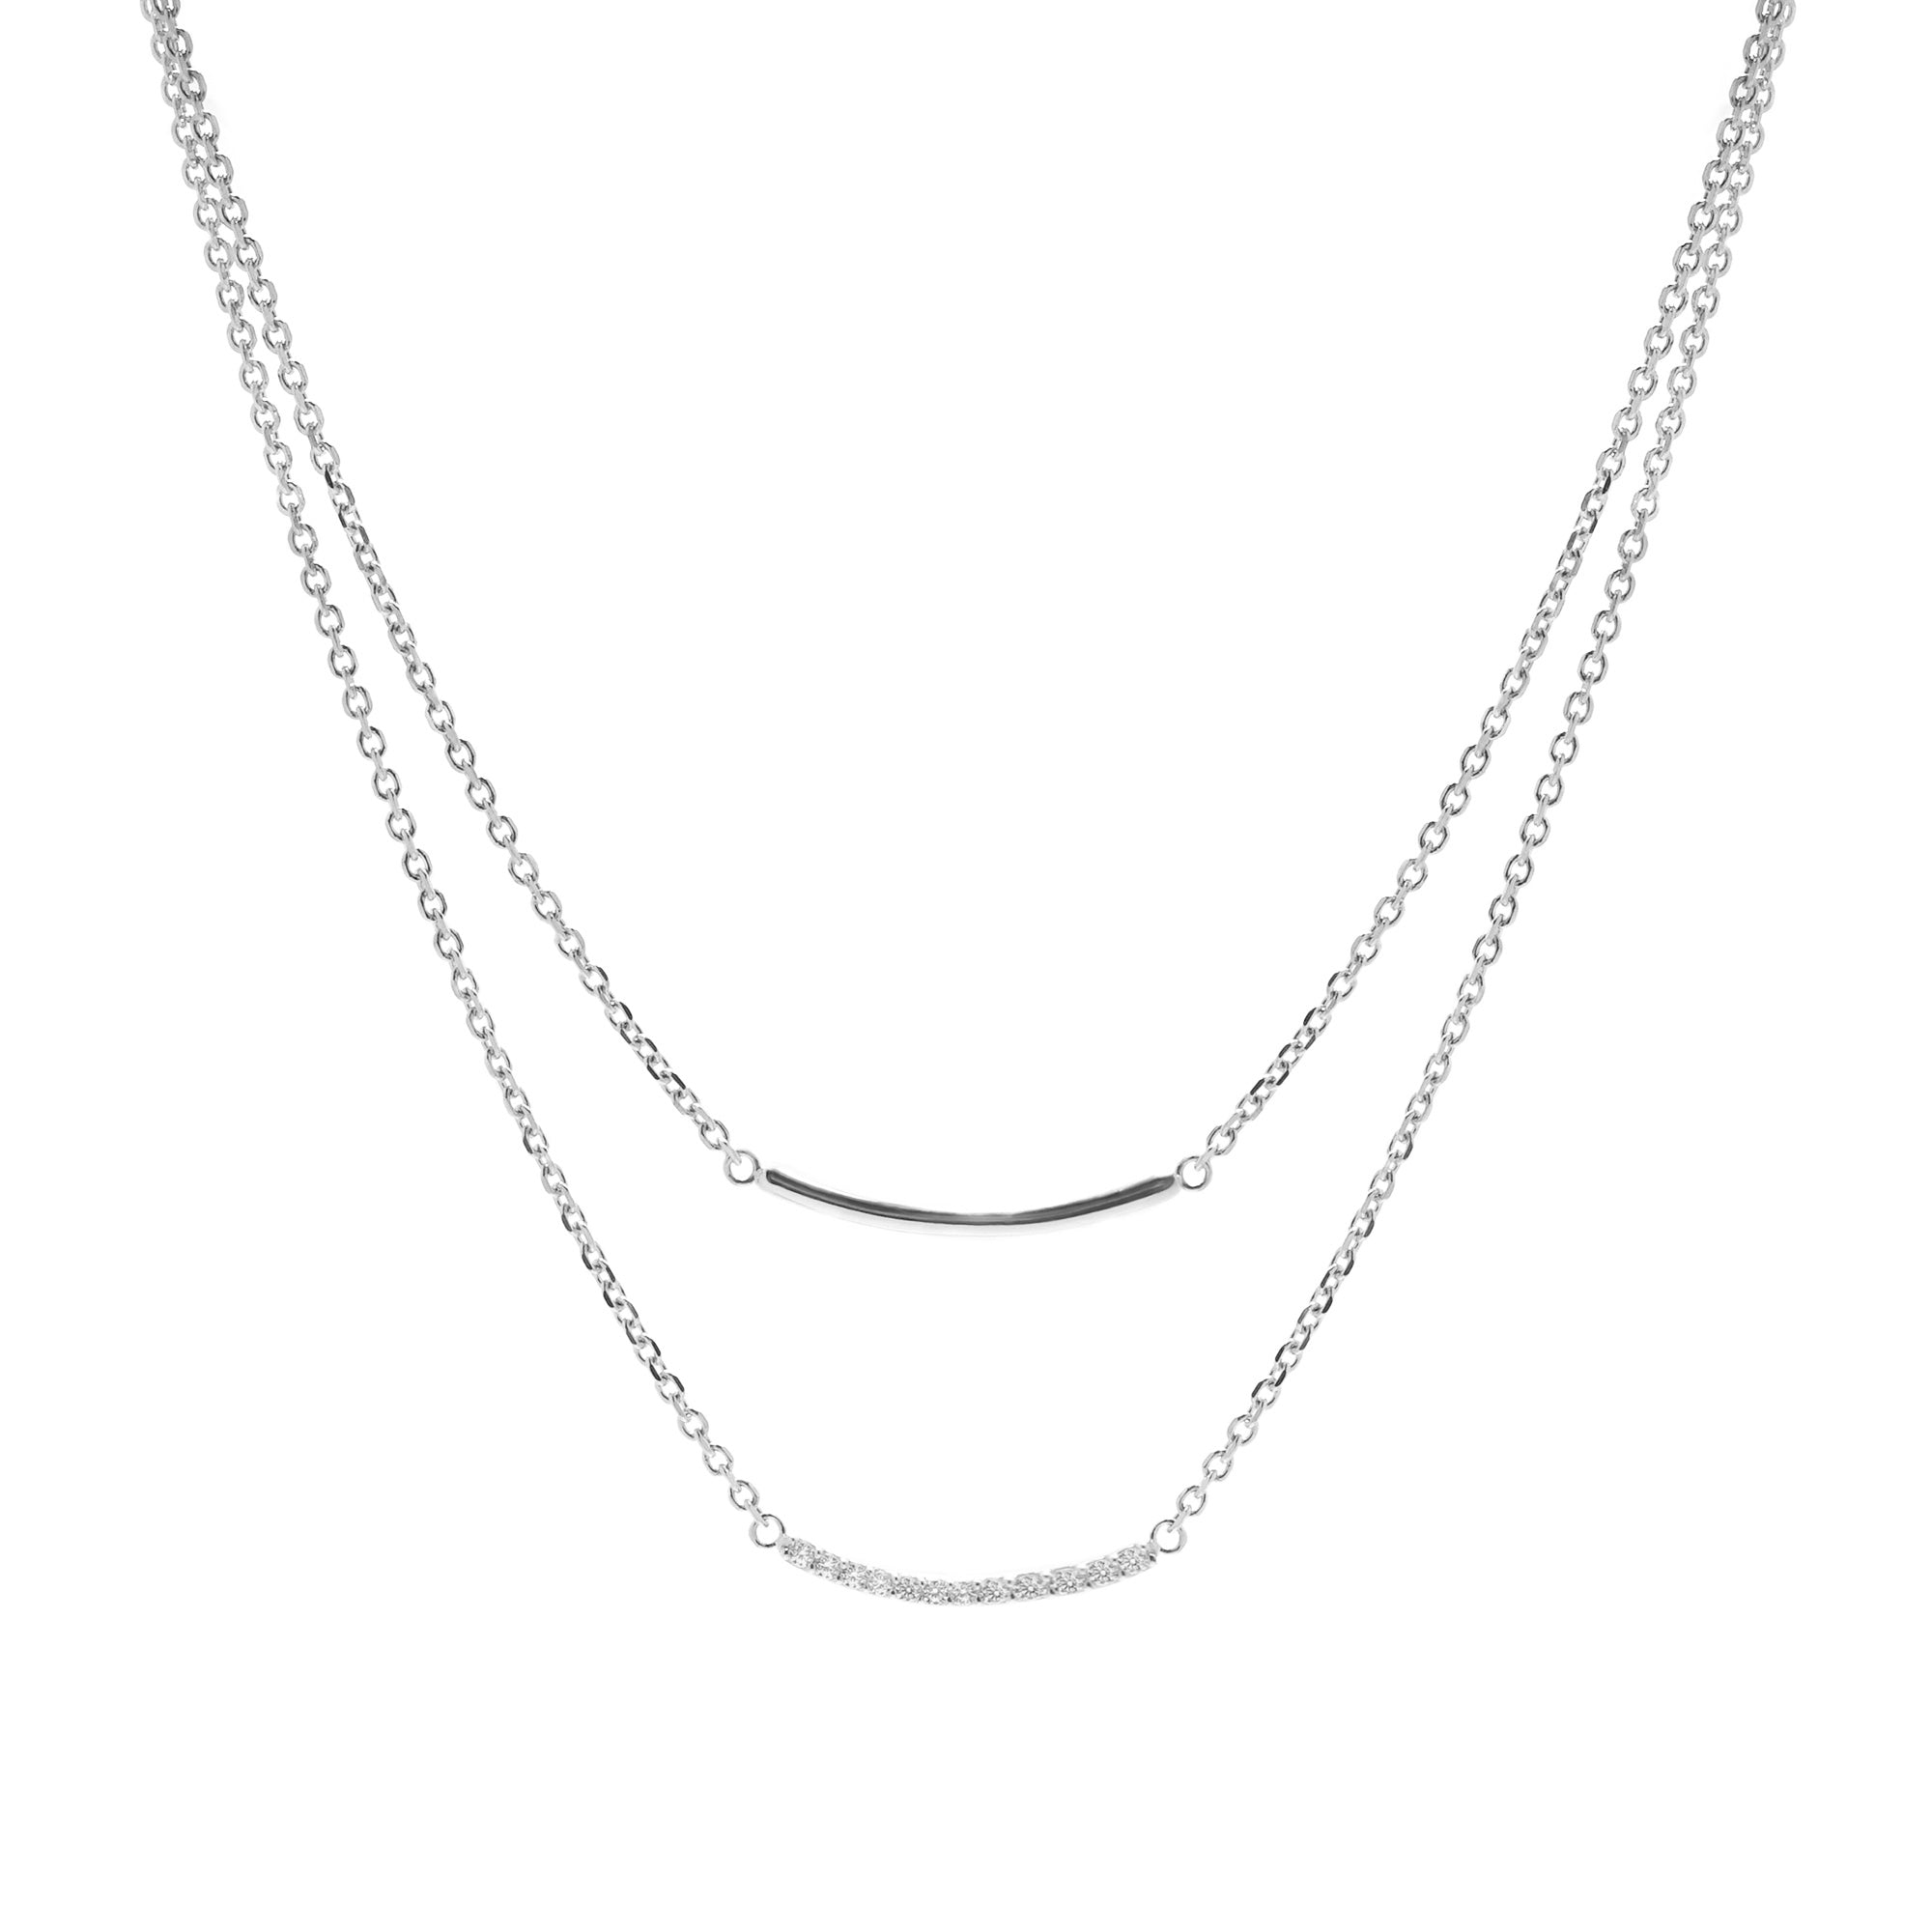 Laura Gold Necklace - Twine Collection - Juene Jewelry